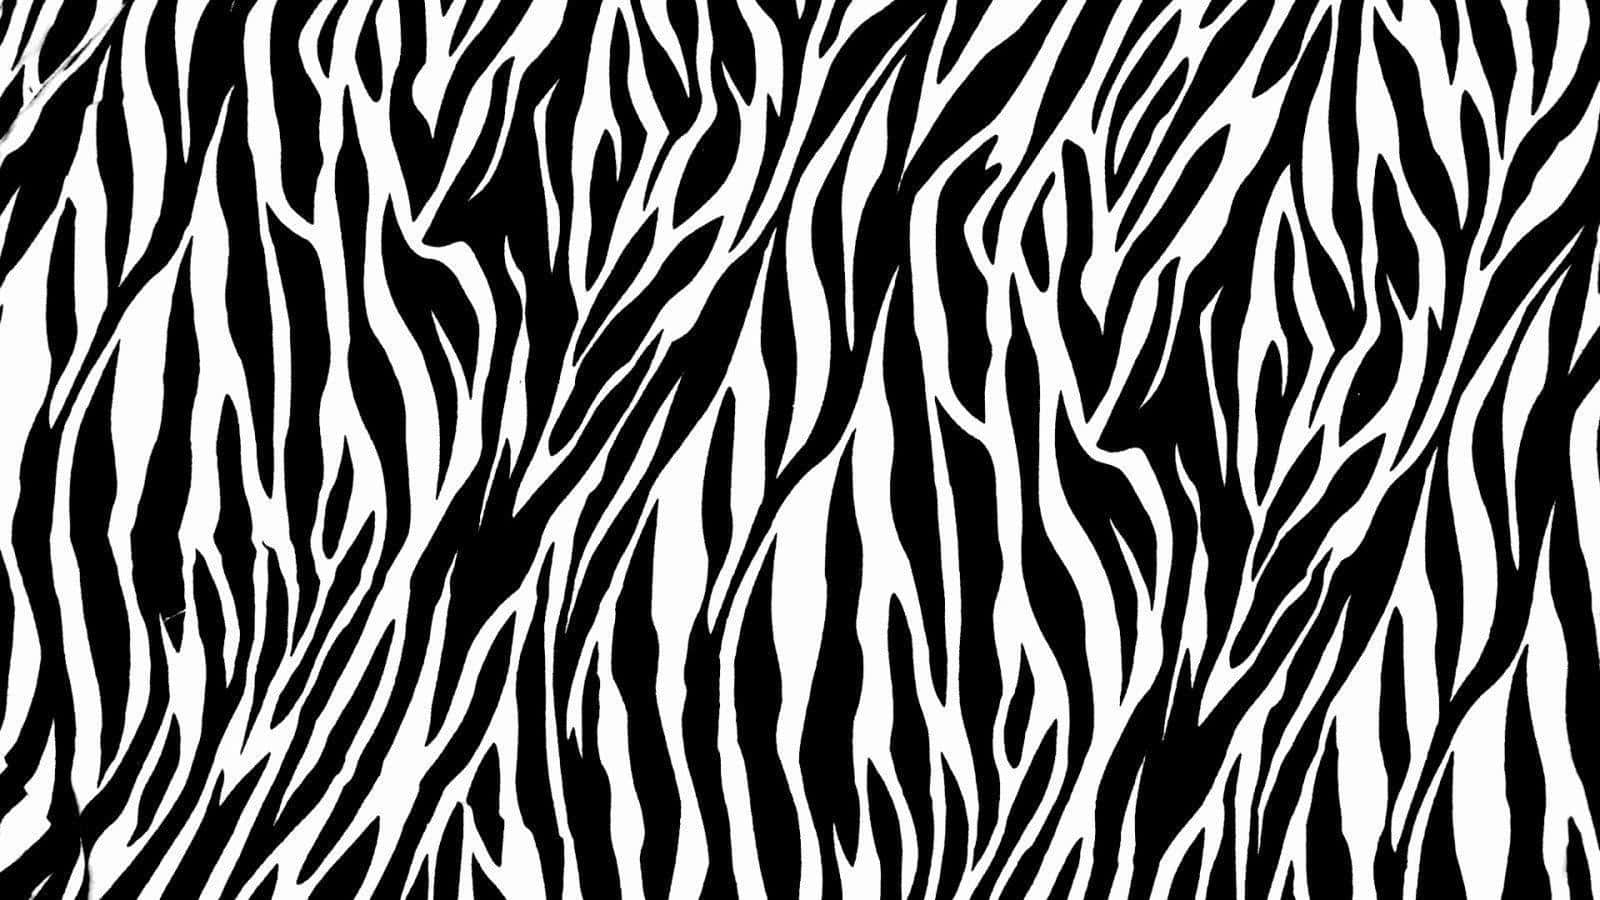 Unleash Your Wild Side With an Animal Print Wallpaper